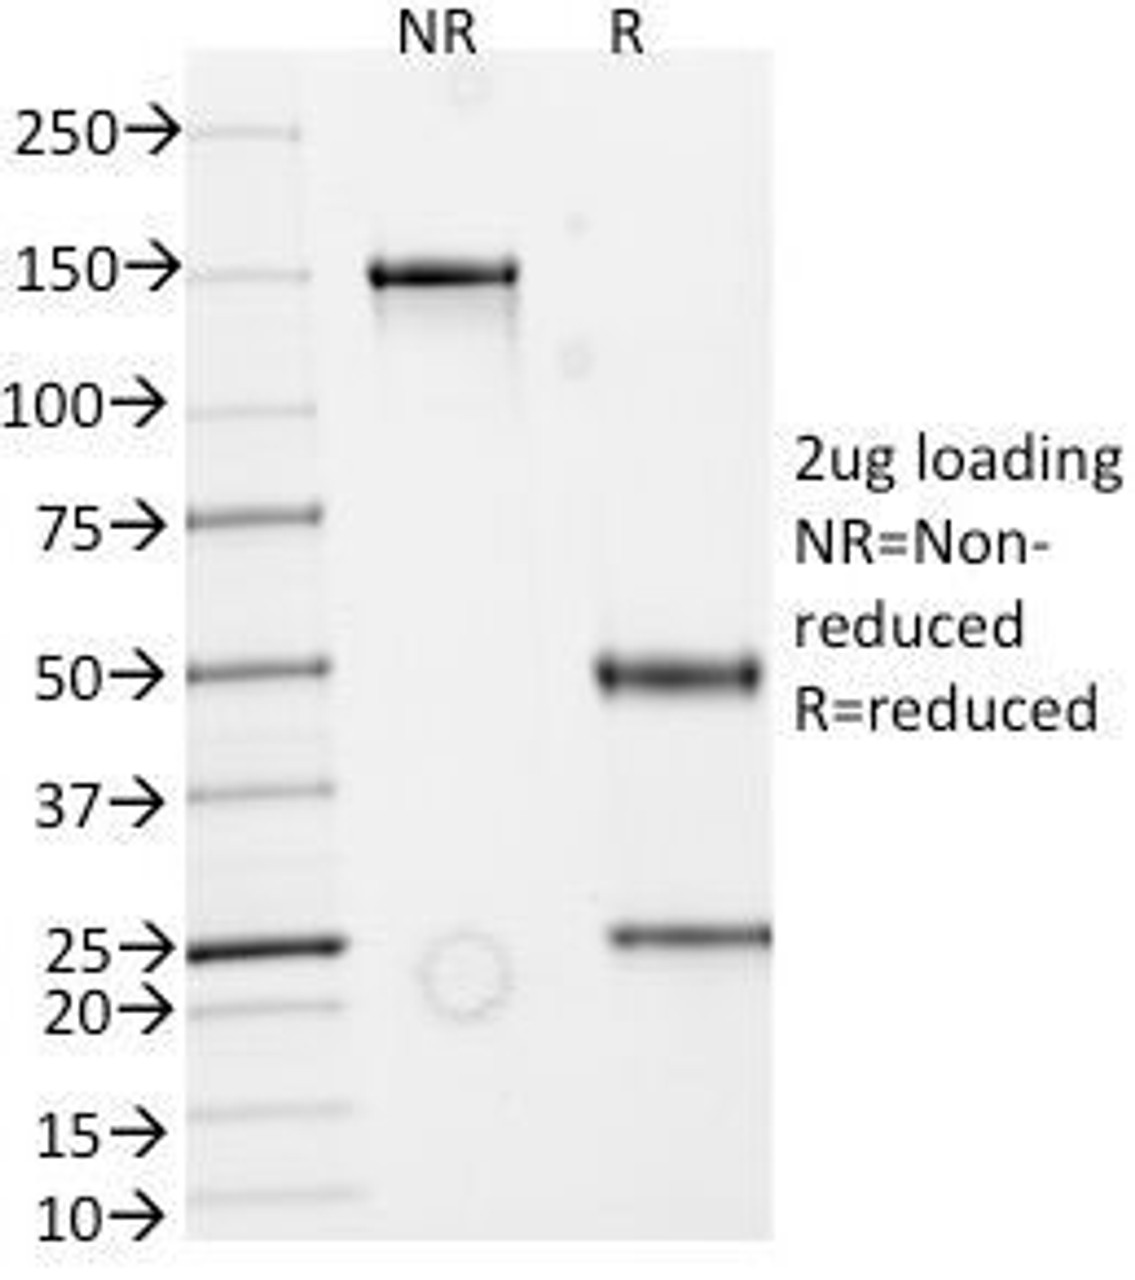 SDS-PAGE Analysis of Purified, BSA-Free Secretory Component Glycoprotein Antibody (clone ECM1/792) . Confirmation of Integrity and Purity of the Antibody.